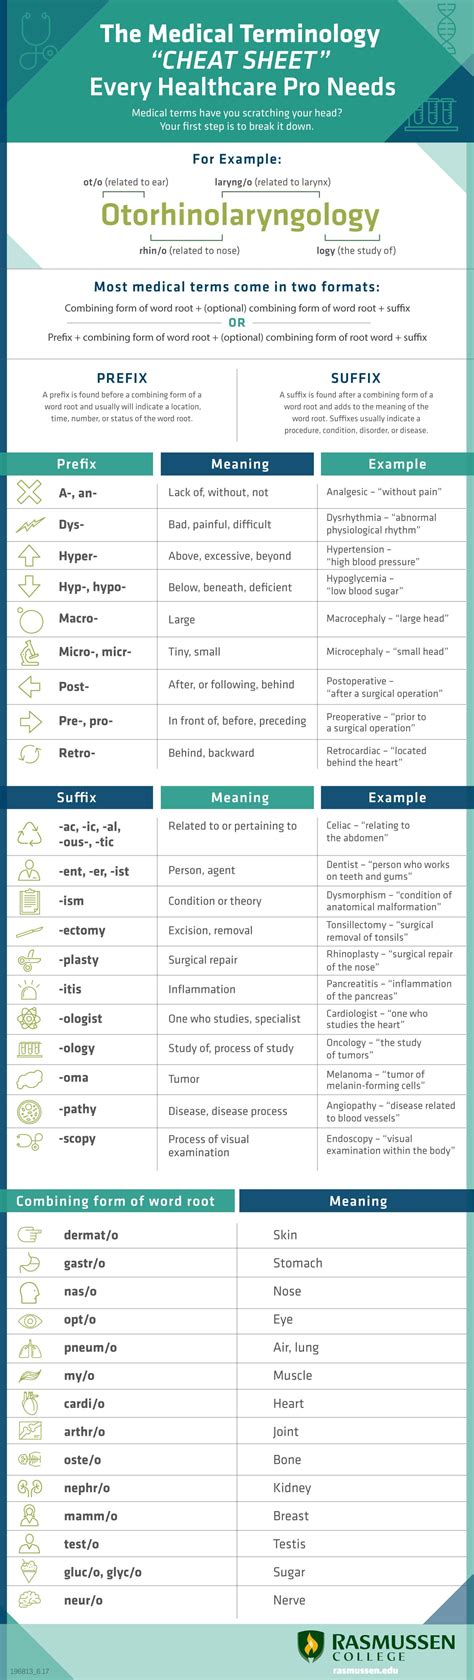 The Medical Terminology “cheat Sheet” Every Healthcare Pro Needs